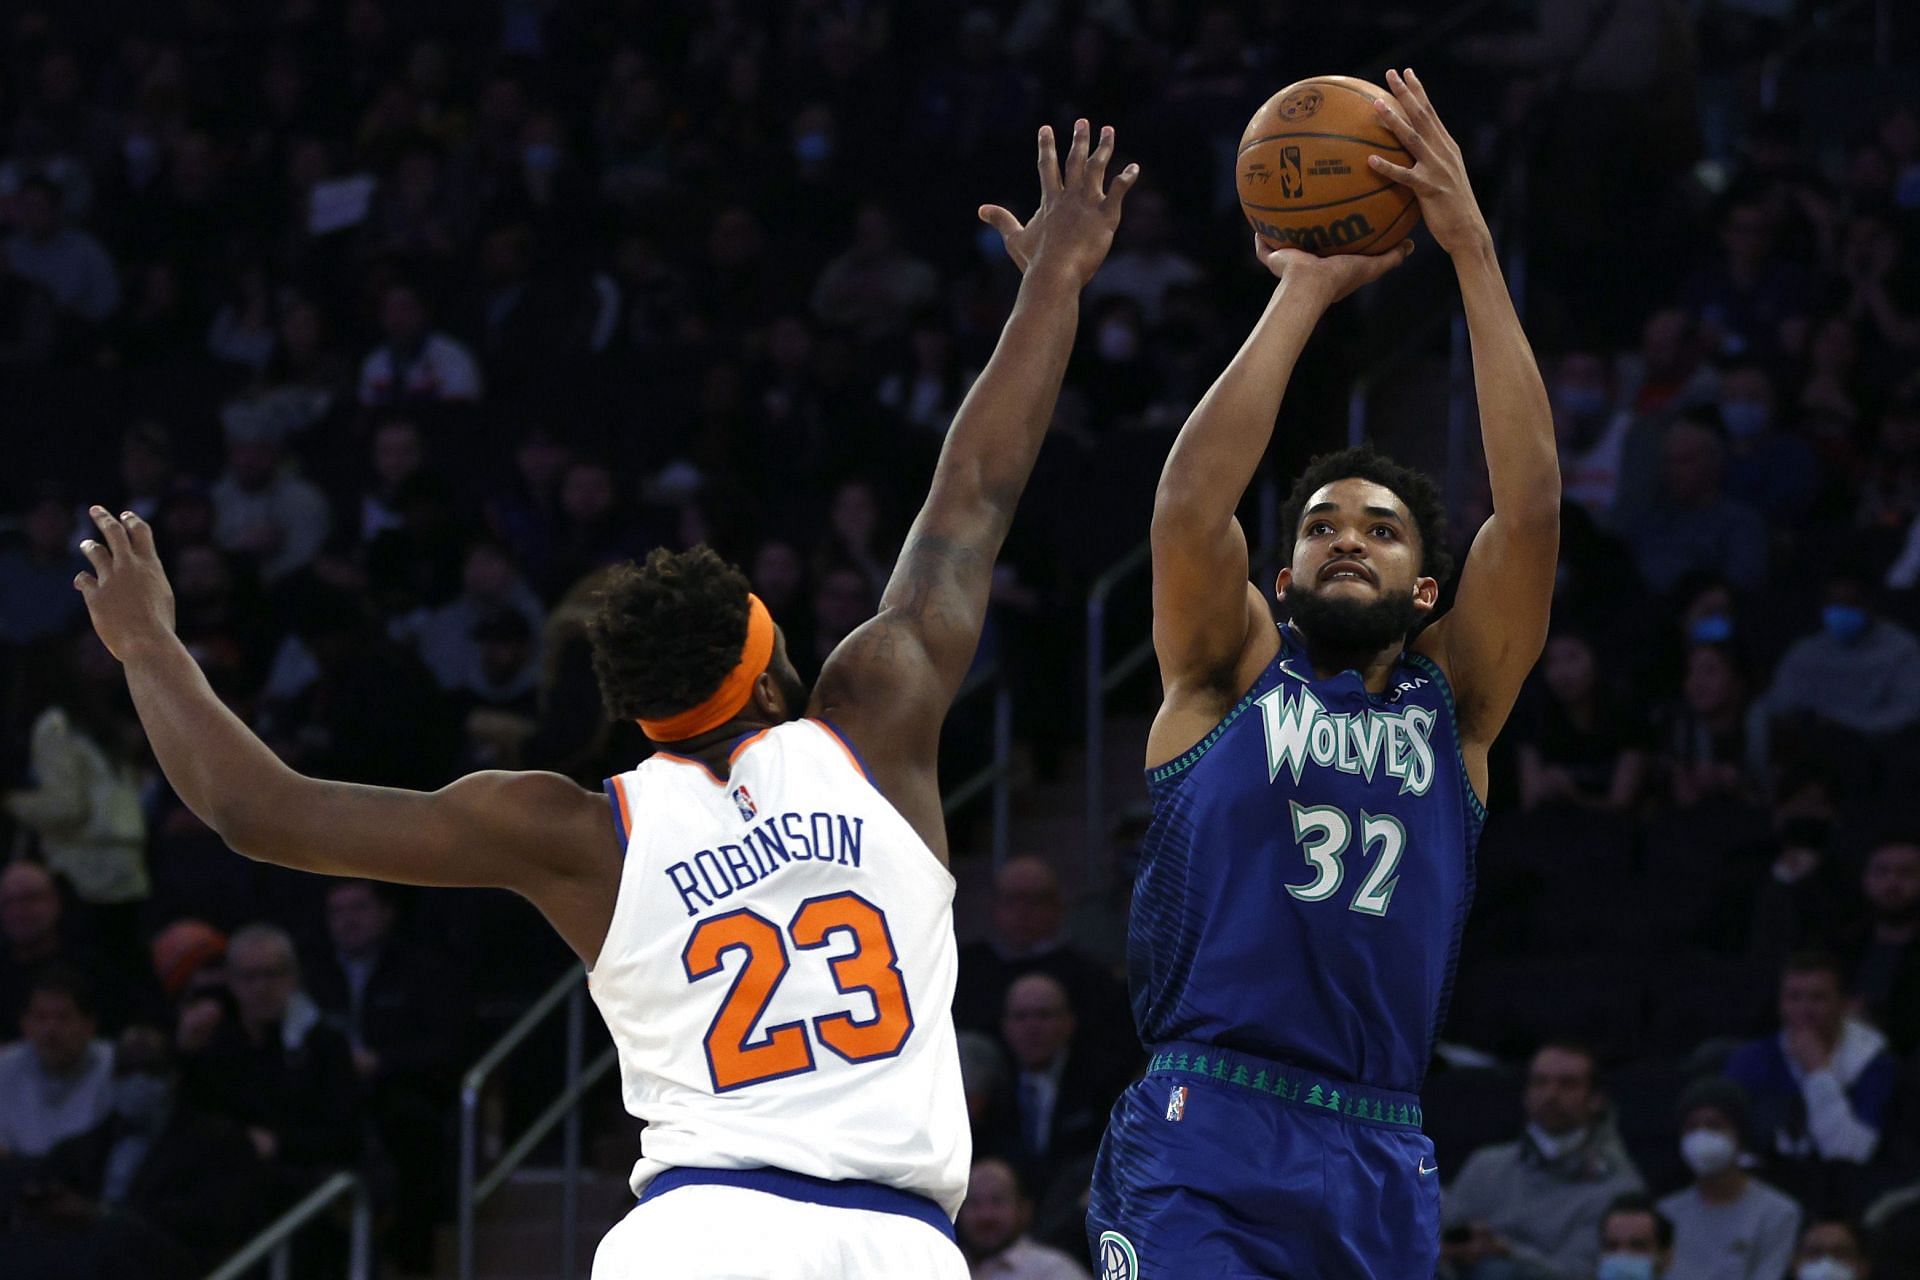 Karl-Anthony Towns of the Minnesota Timberwolves shooting over Mitchell Robinson of the New York Knicks